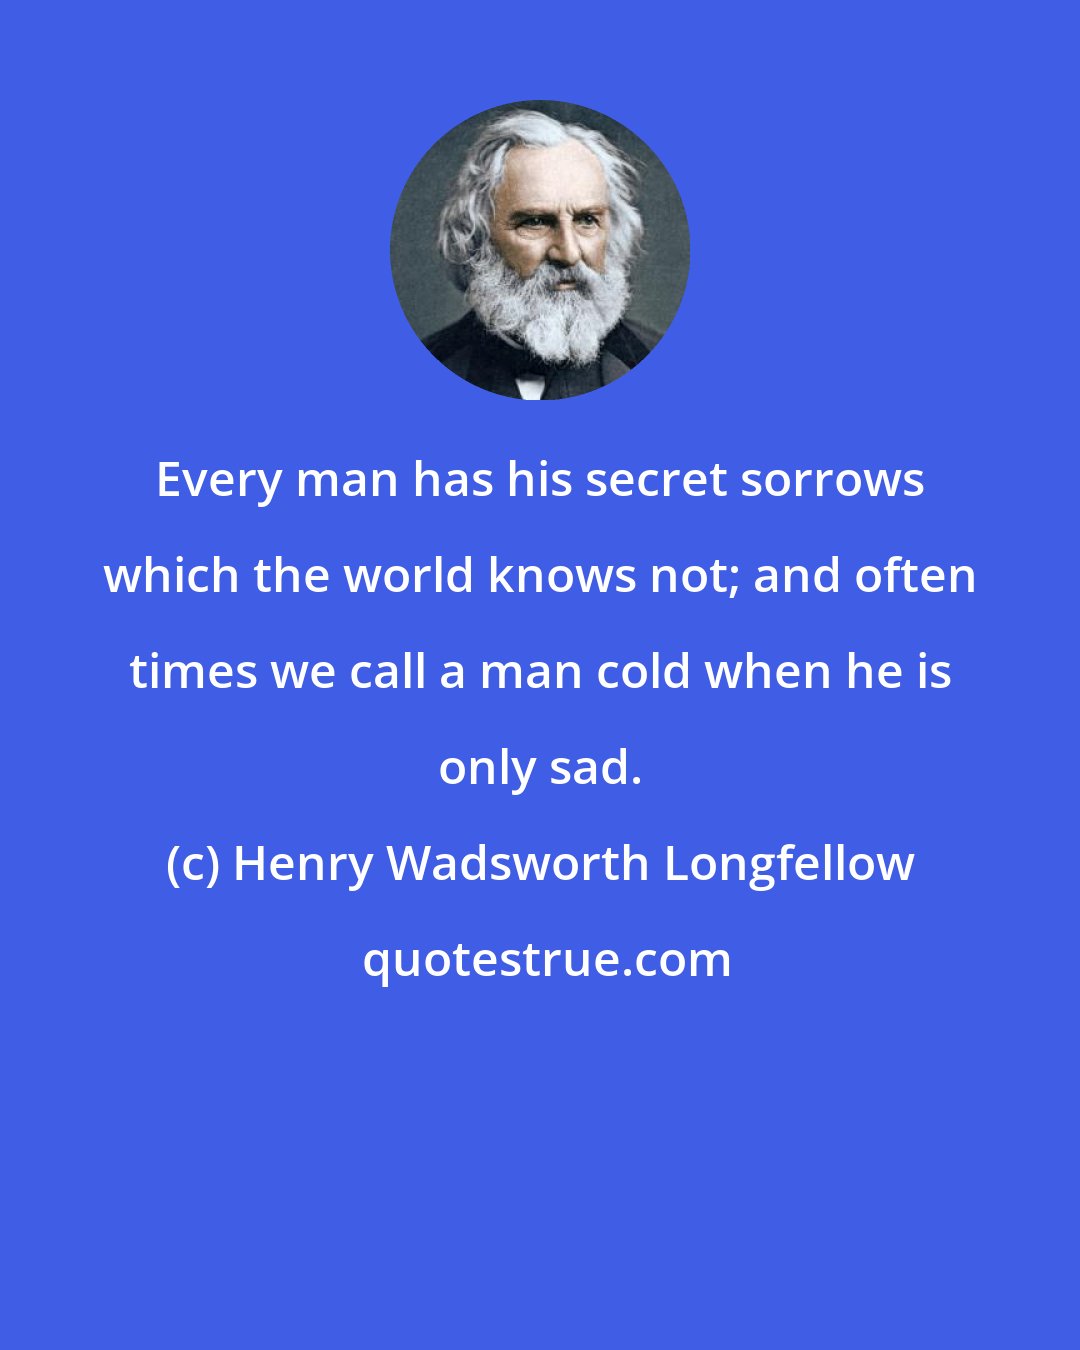 Henry Wadsworth Longfellow: Every man has his secret sorrows which the world knows not; and often times we call a man cold when he is only sad.